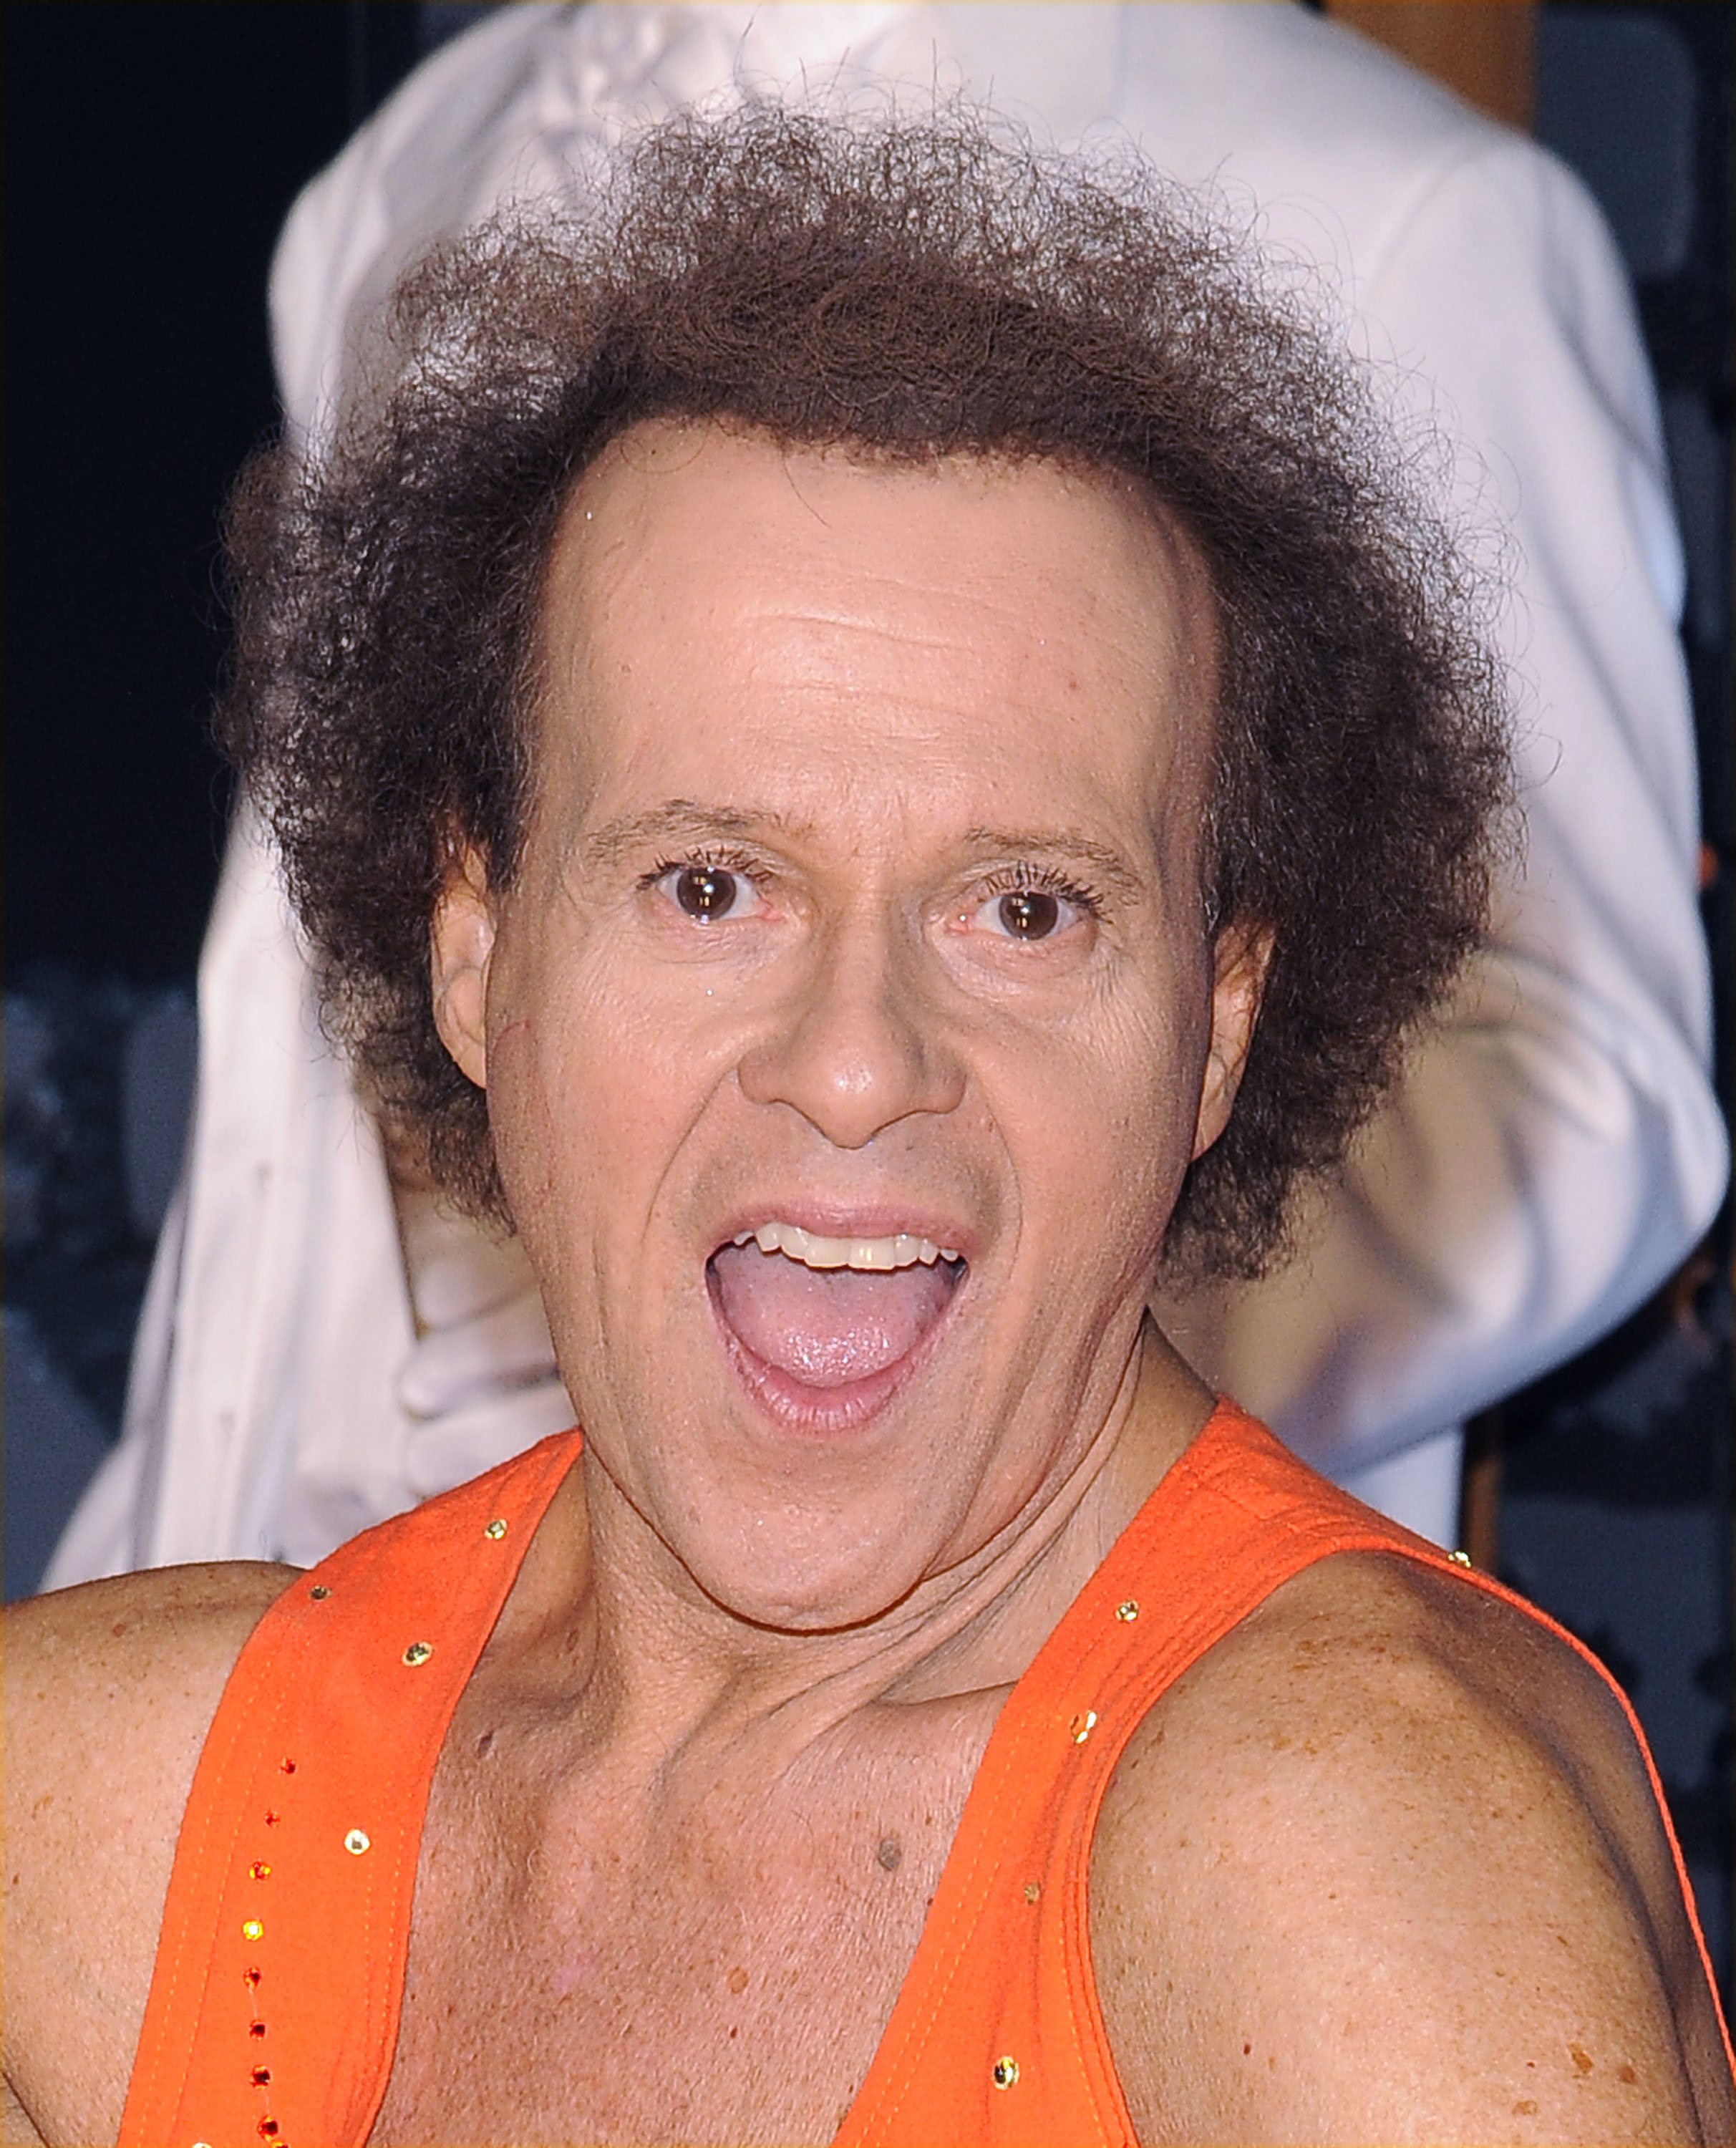 Richard Simmons attends the 2013 MTV Video Music Awards at the Barclays Center on August 25, 2013, in the Brooklyn borough of New York City. | Source: Getty Images